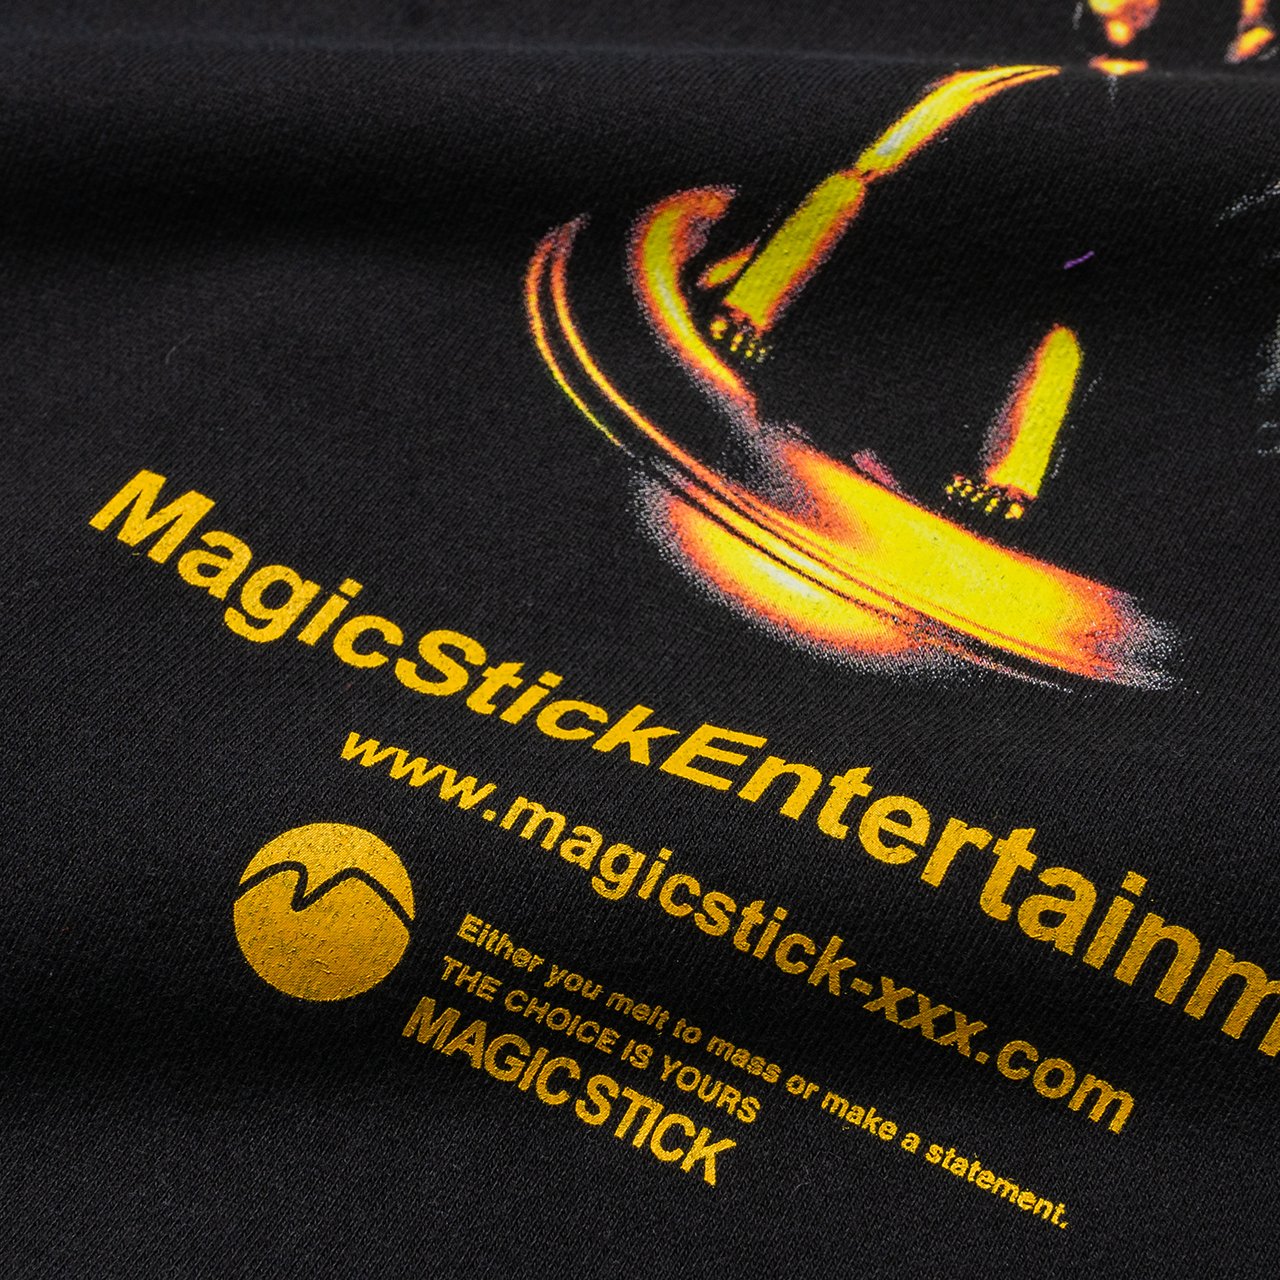 magic stick world is yours og logo hoodie (black) - 20ss-ms2-015 - a.plus - Image - 6